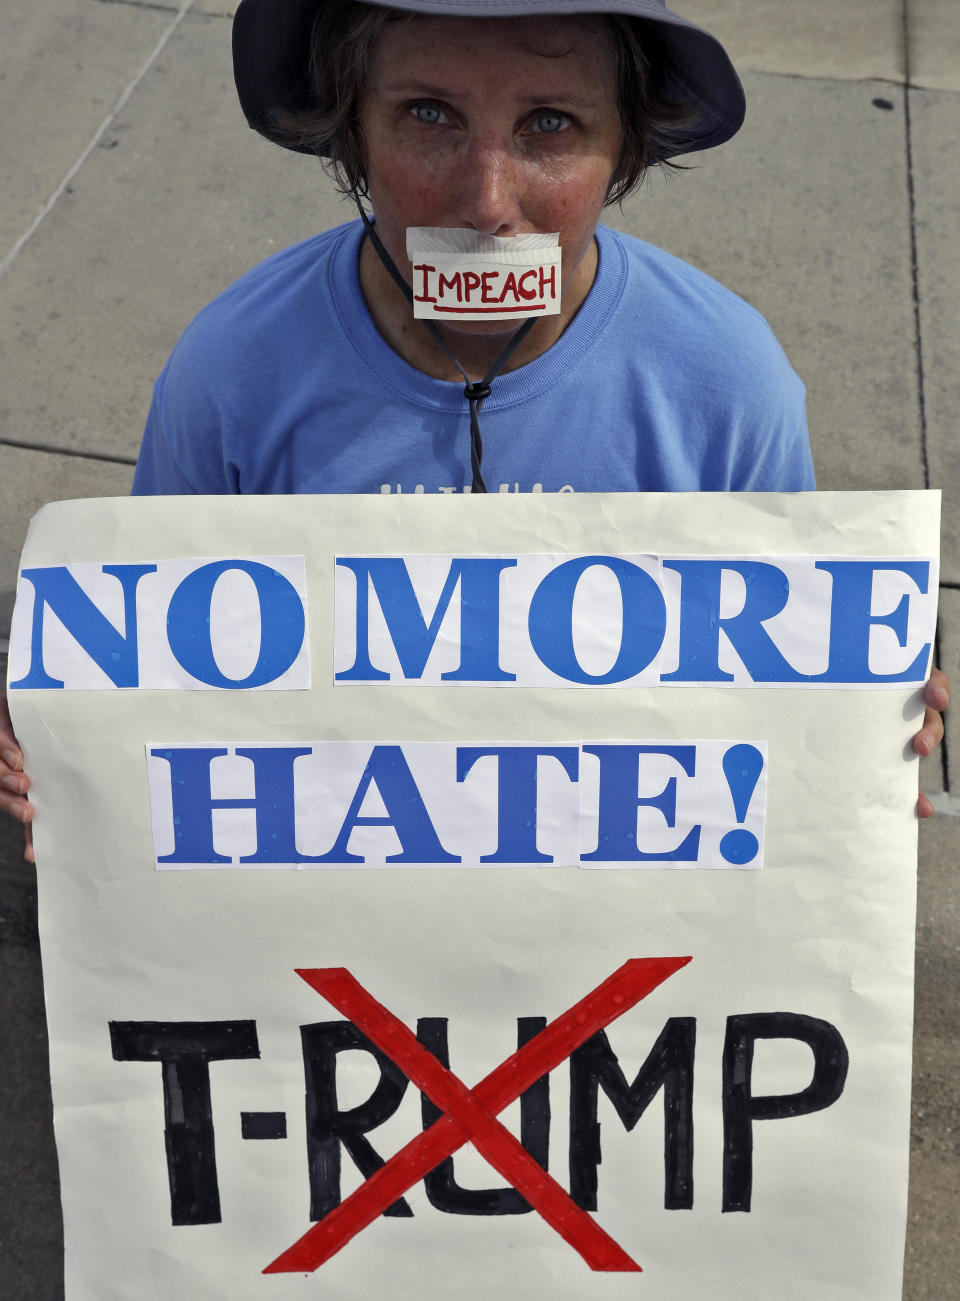 Michelle Pihos from The Villages, Fla., holds an anti President Donald Trump sign during a rally Tuesday, June 18, 2019, in Orlando, Fla. A large group of protestors were holding a rally near where Trump was announcing his re-election campaign. (AP Photo/Chris O'Meara)